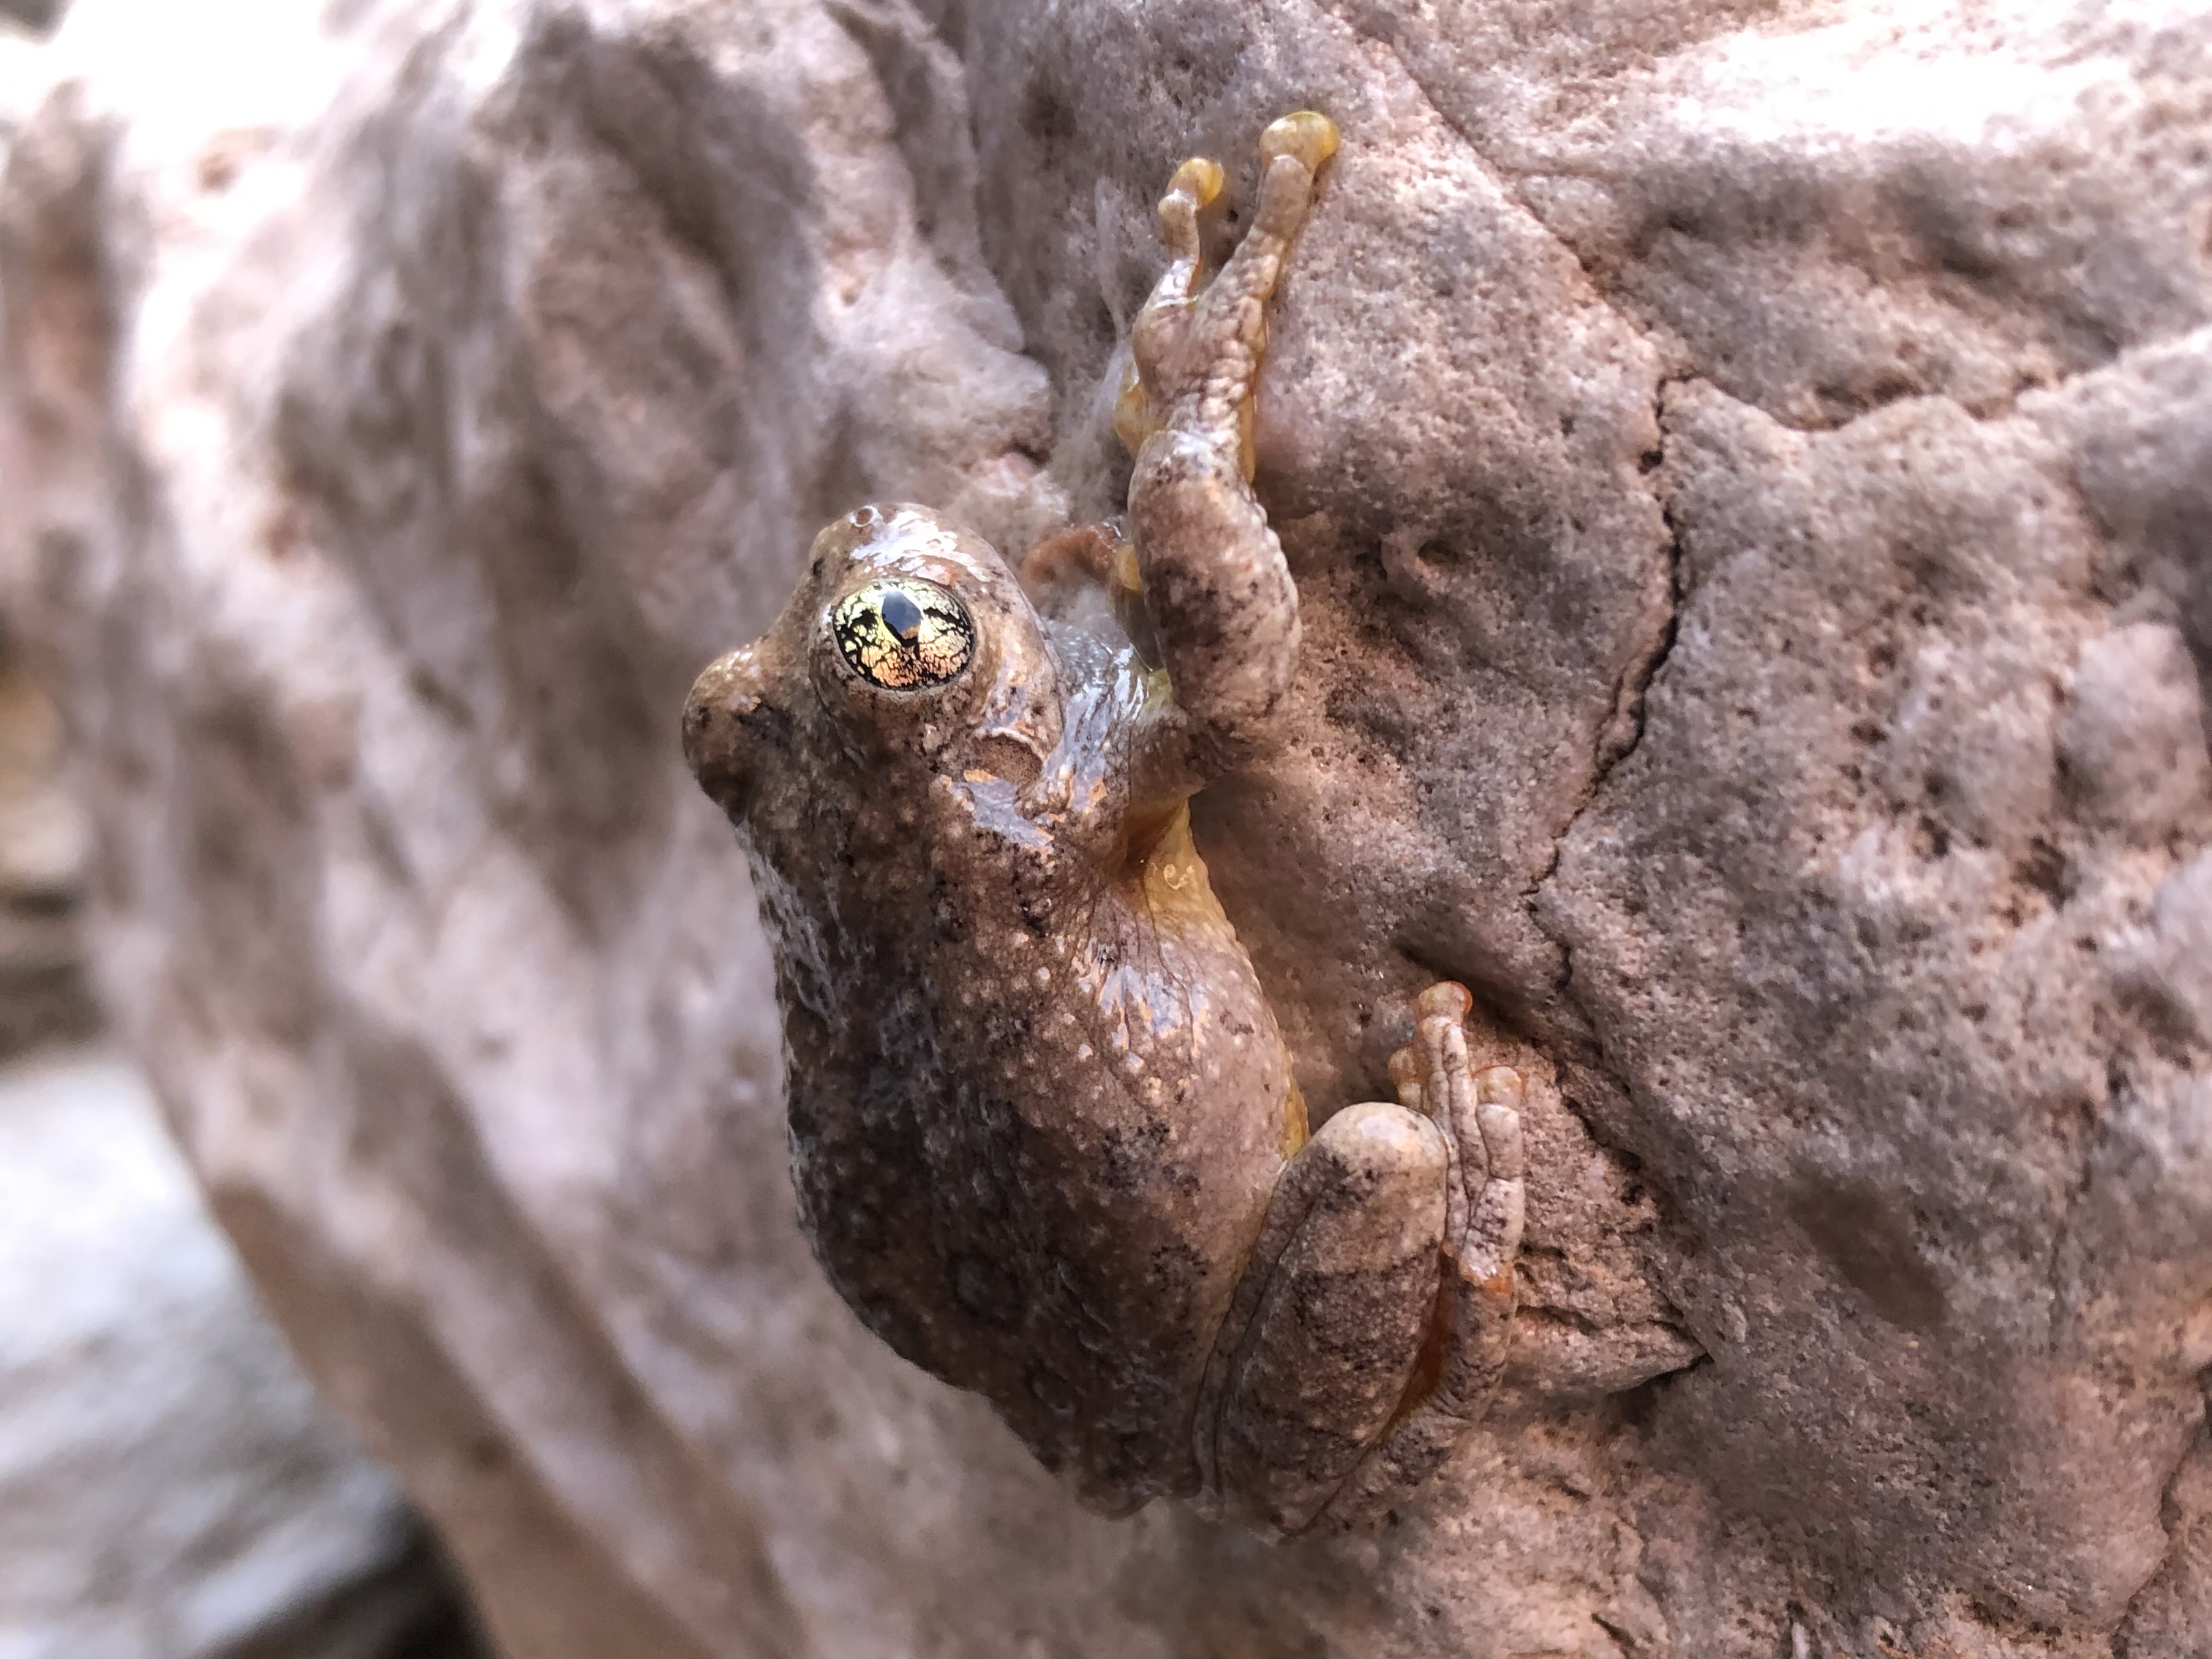 A small, long-toed treefrog the color of sandstone clings to a standstone rock.